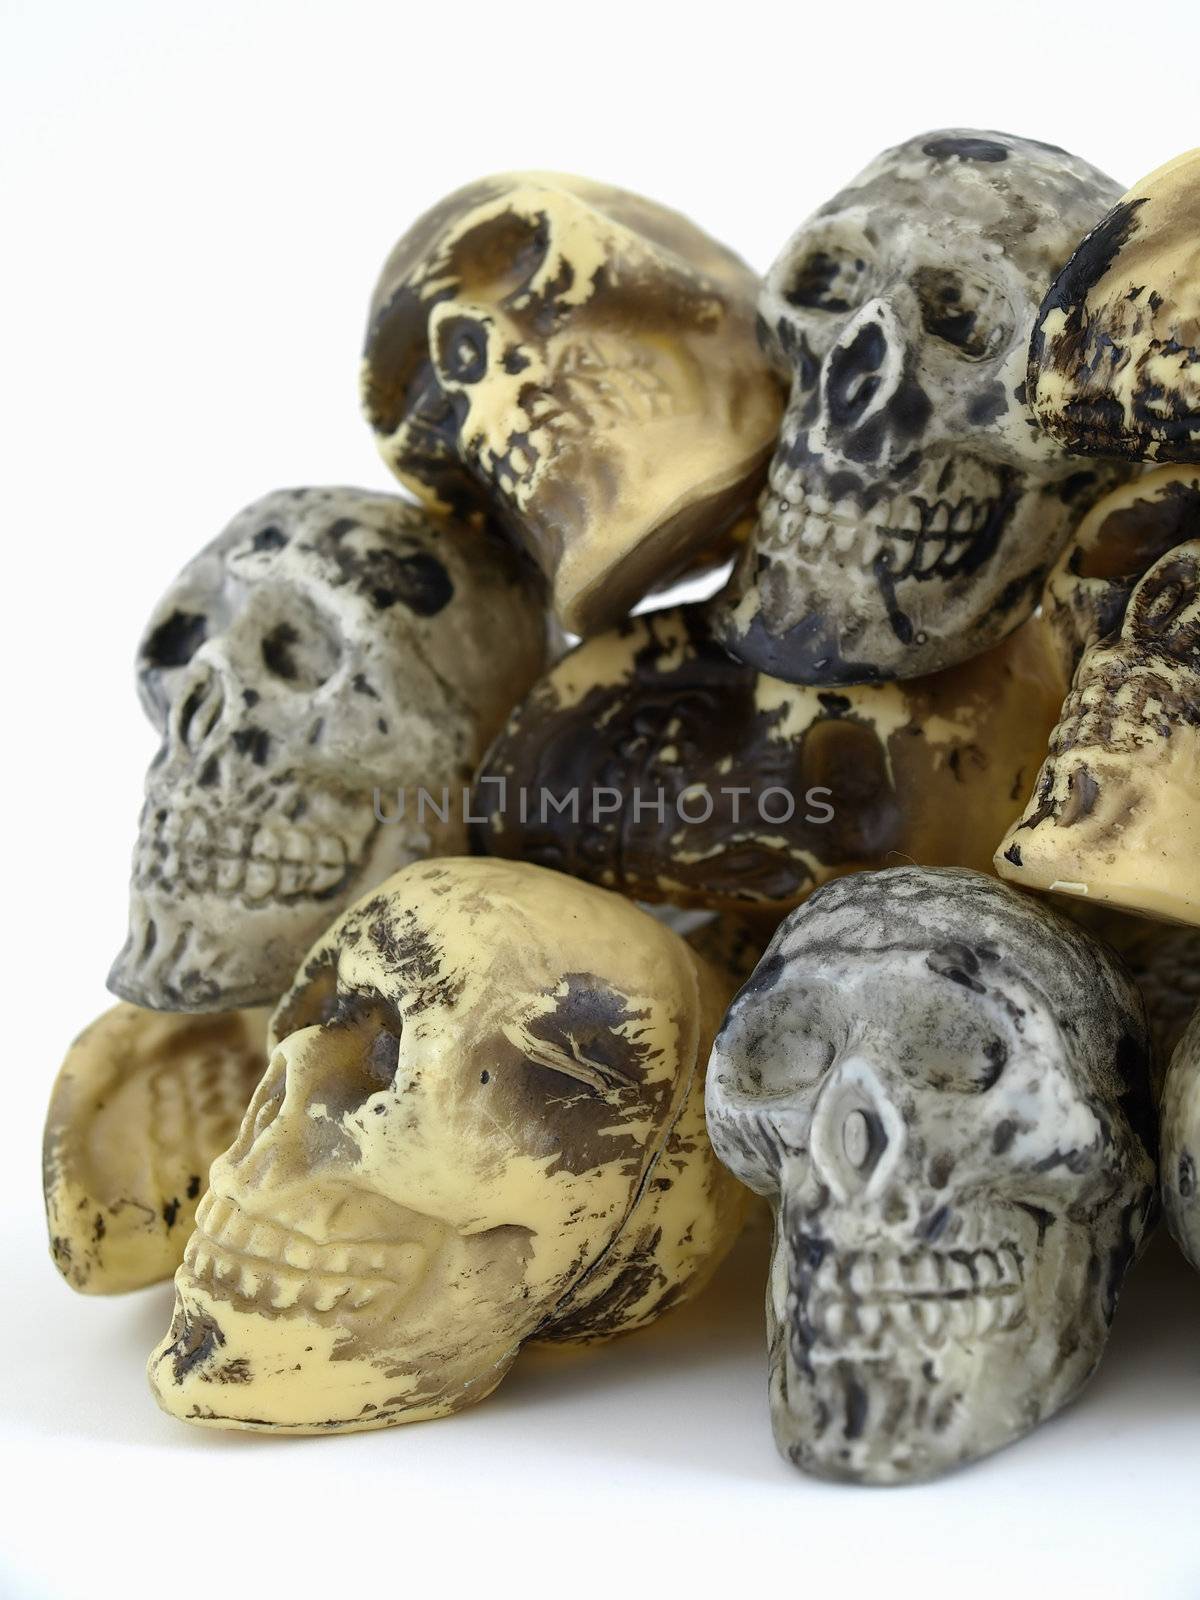 Toy Skull Formation by RGebbiePhoto